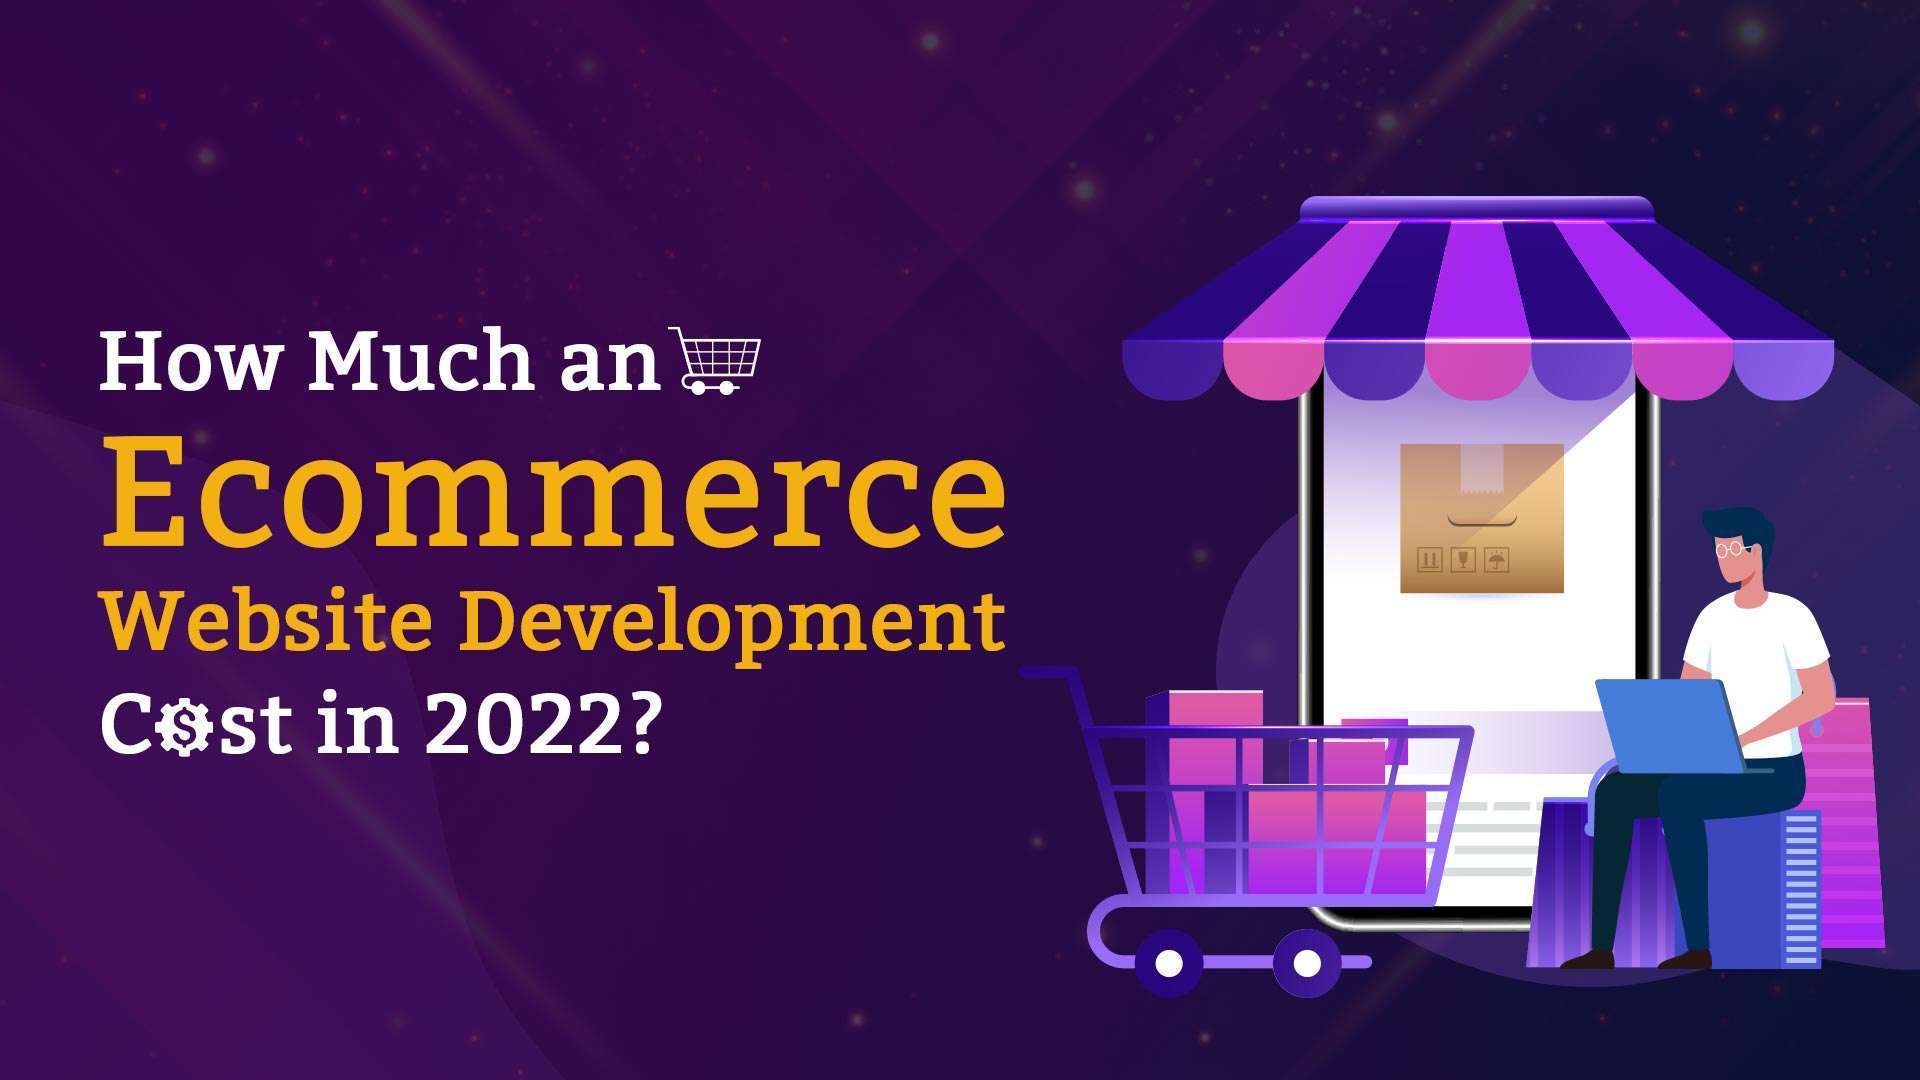 How Much An Ecommerce Website Development Cost In 2022